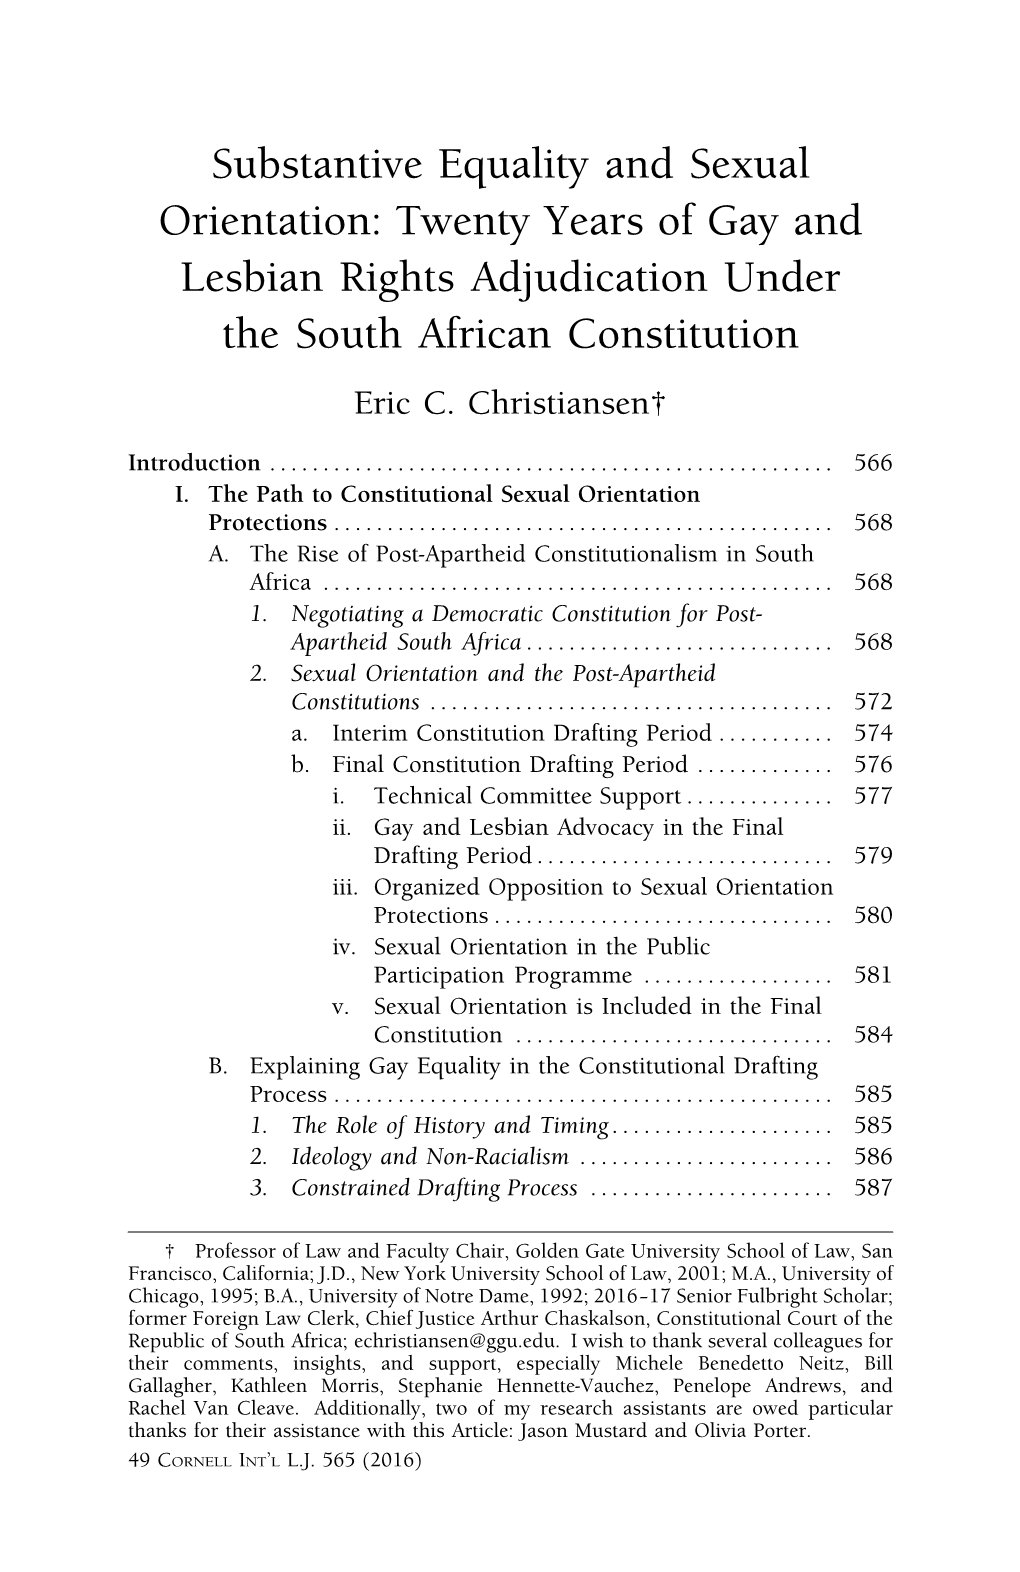 Substantive Equality and Sexual Orientation: Twenty Years of Gay and Lesbian Rights Adjudication Under the South African Constitution Eric C